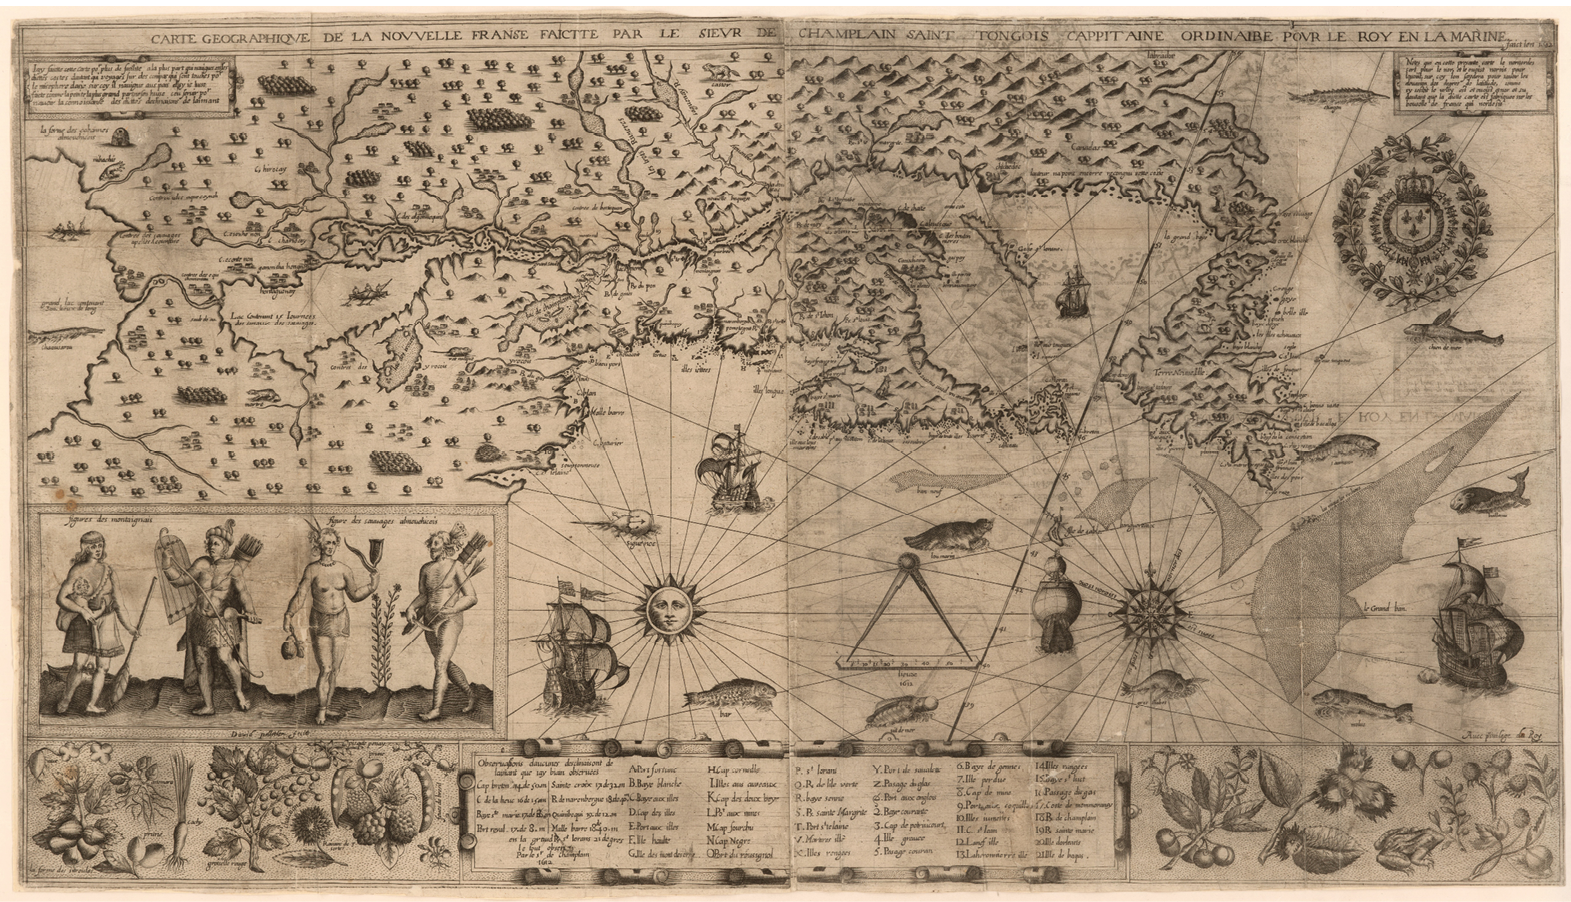 A map of â€œNew Franceâ€� or todayâ€™s Canada from 1612: depicts various geographical elements such as land, lakes, mountains, and open ocean; includes a marginal note marking various locations of interest in French; includes drawings of a compass rose, a sun, various ships, and a french seal; includes native flora and fauna scattered through the map; the left-hand side shows a drawing of four natives, a woman holding a child, two men with weapons, and a man holding native crops.